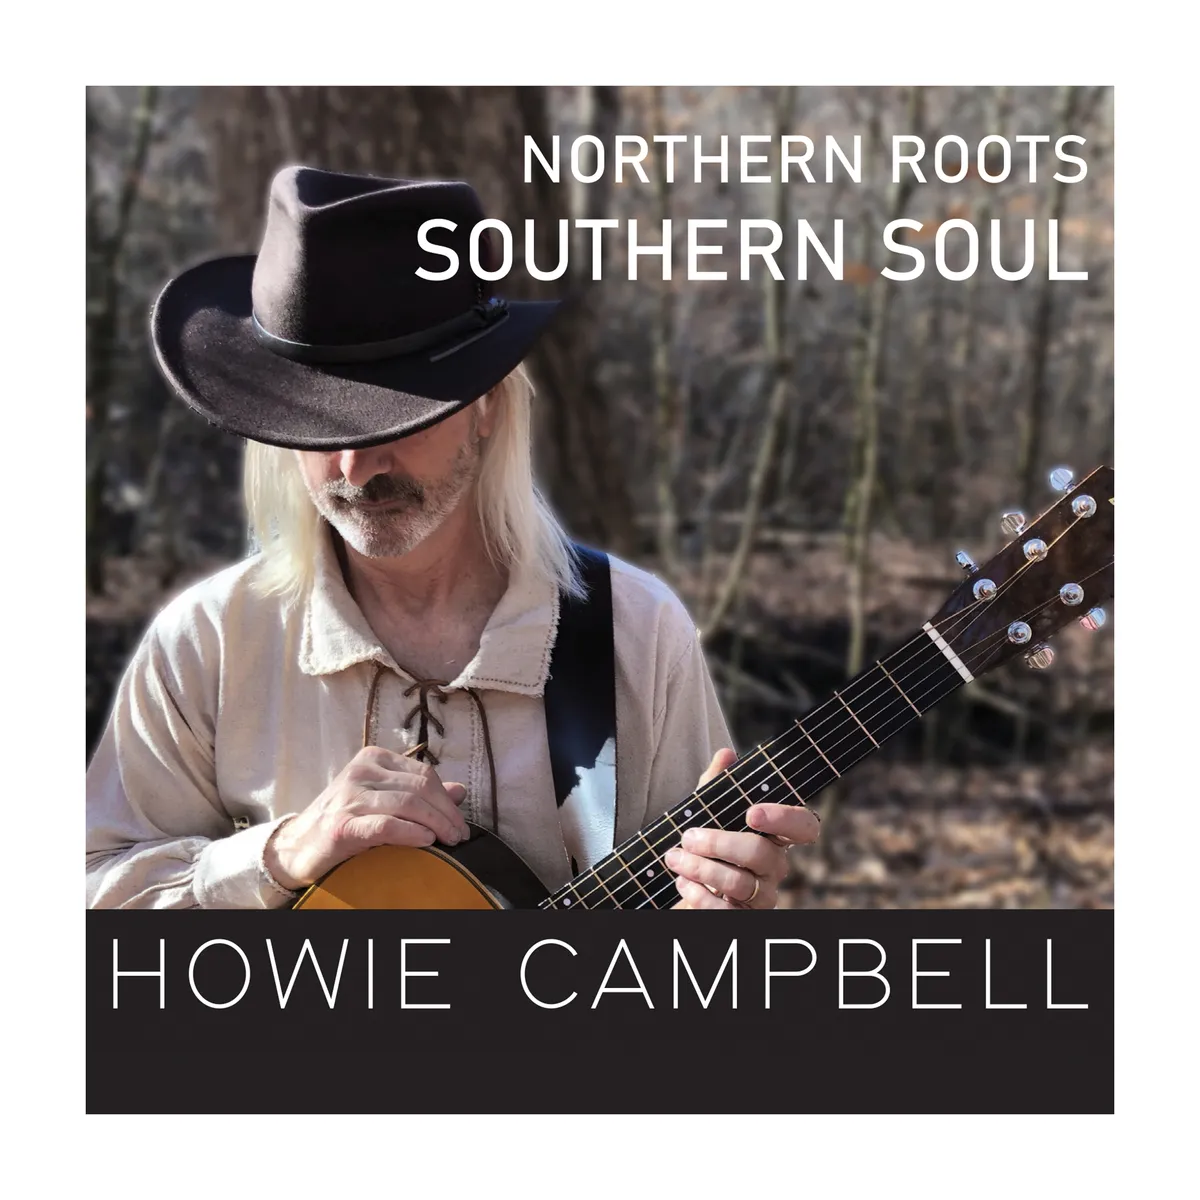 Northern Roots Southern Soul - signed copy